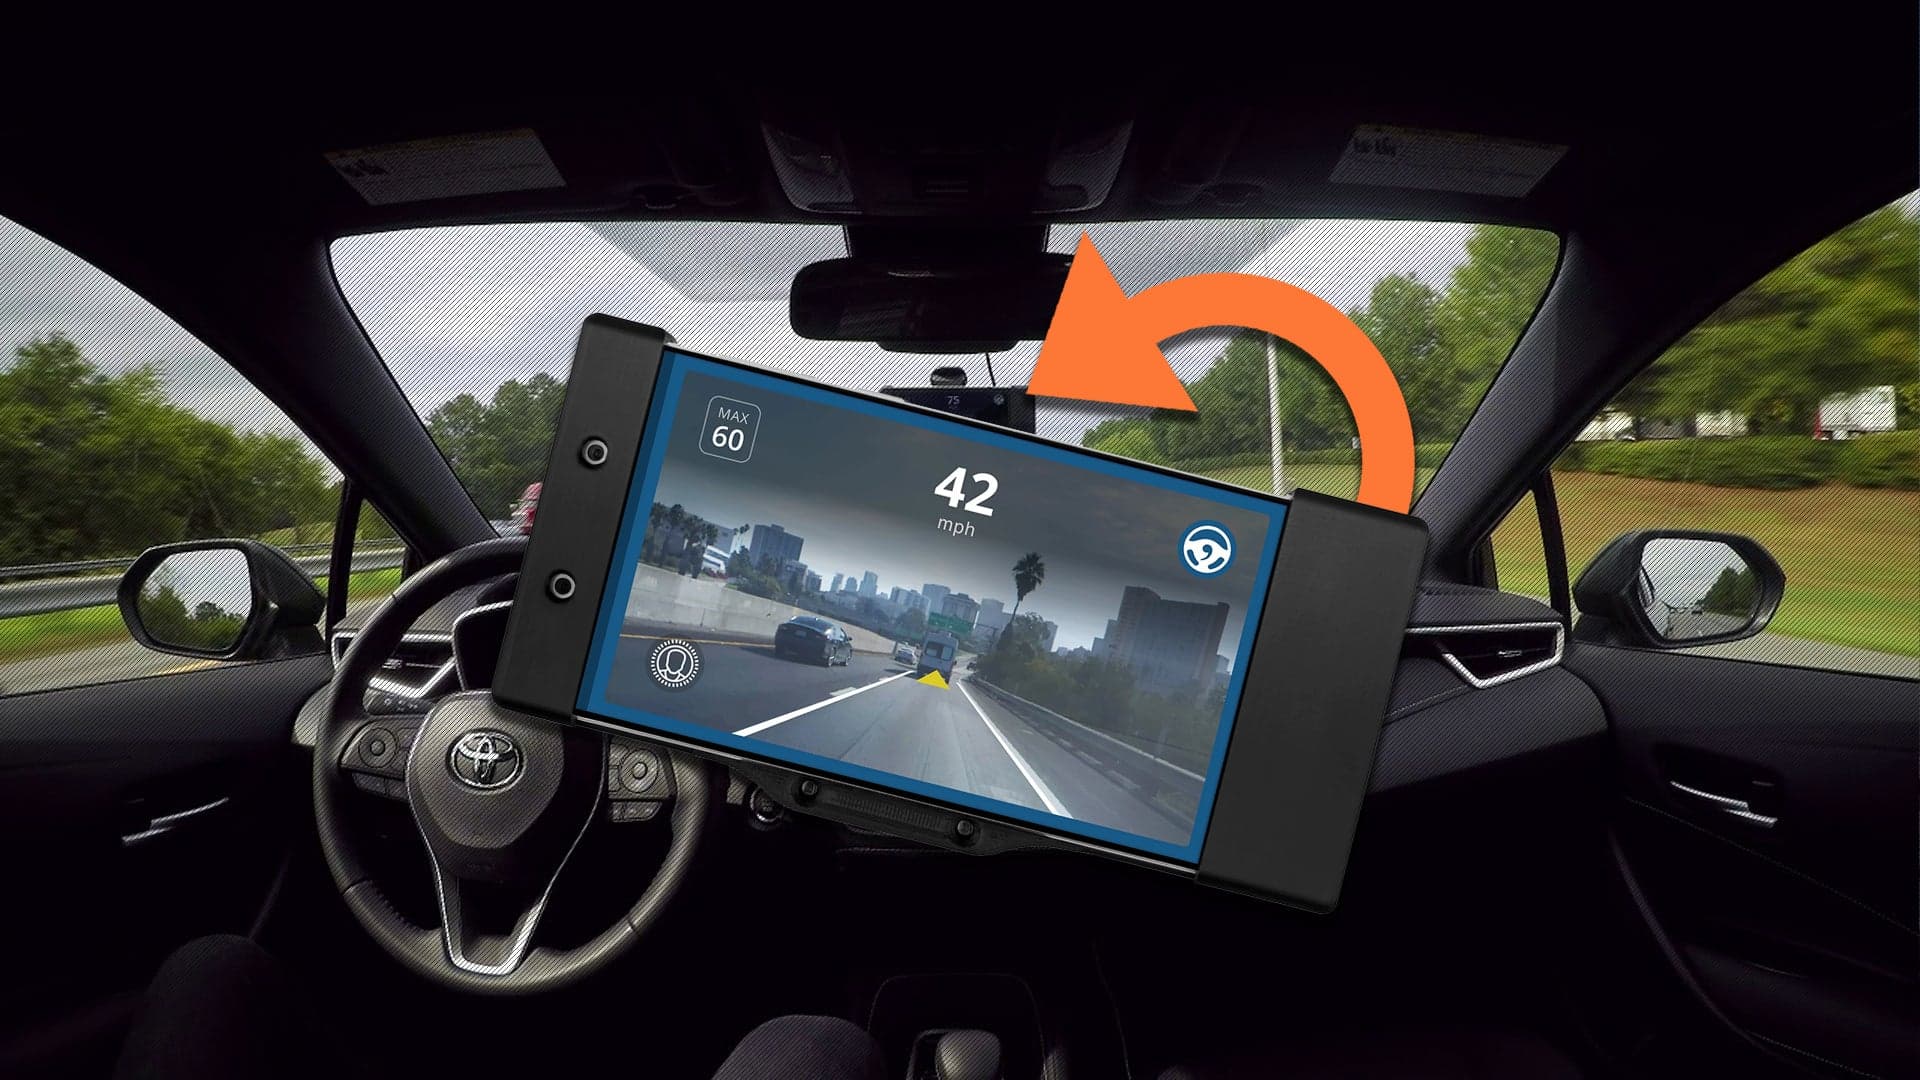 We Tested OpenPilot, the $1,199 Device That Adds Entry-Level Autonomy to Your Car